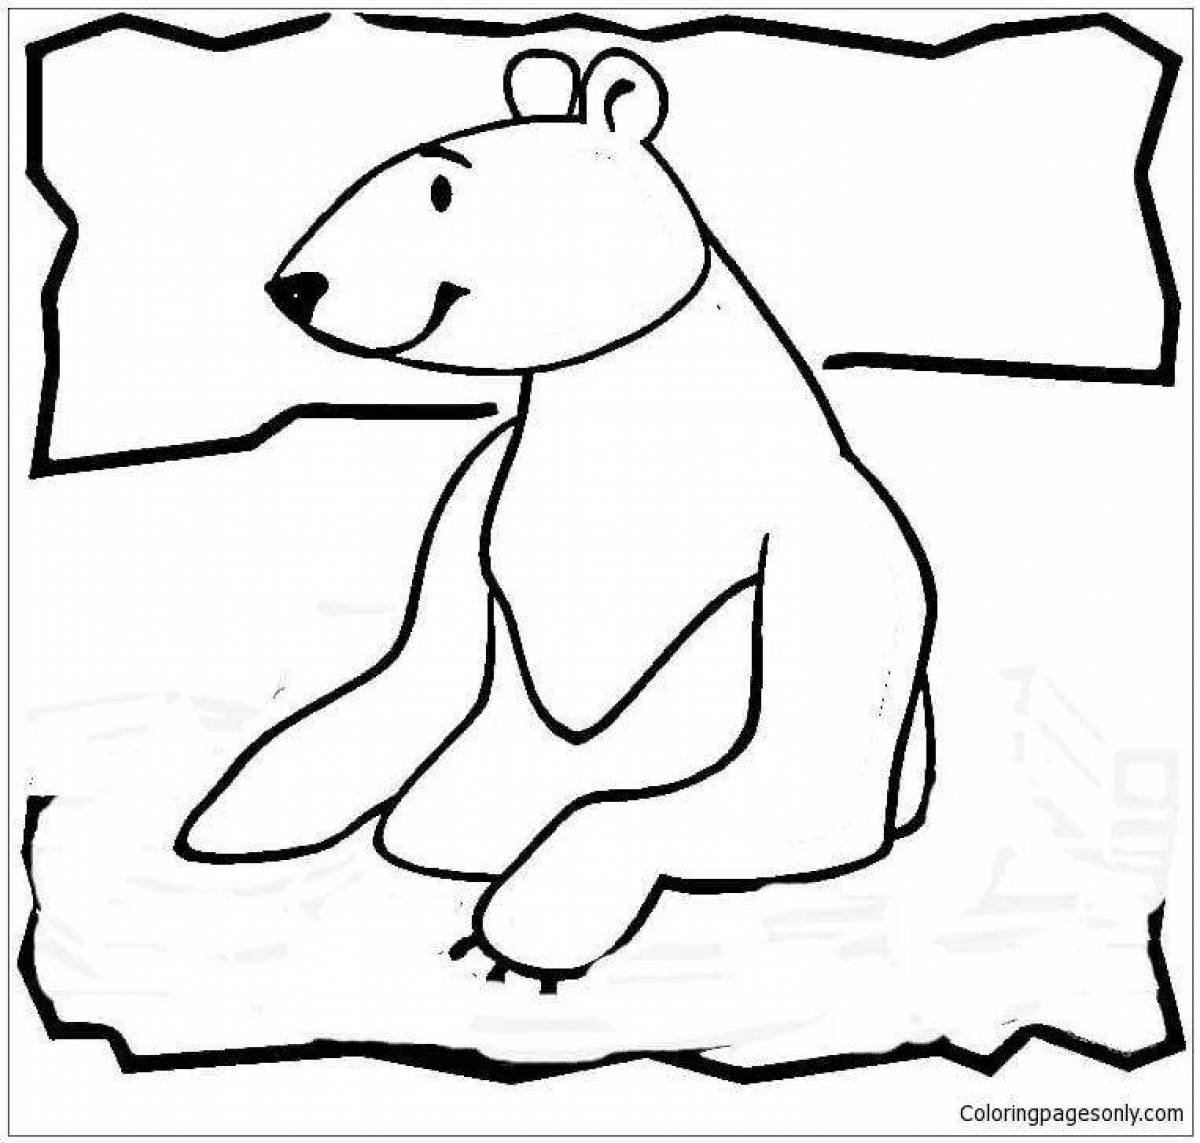 Coloring book glowing bear in the north